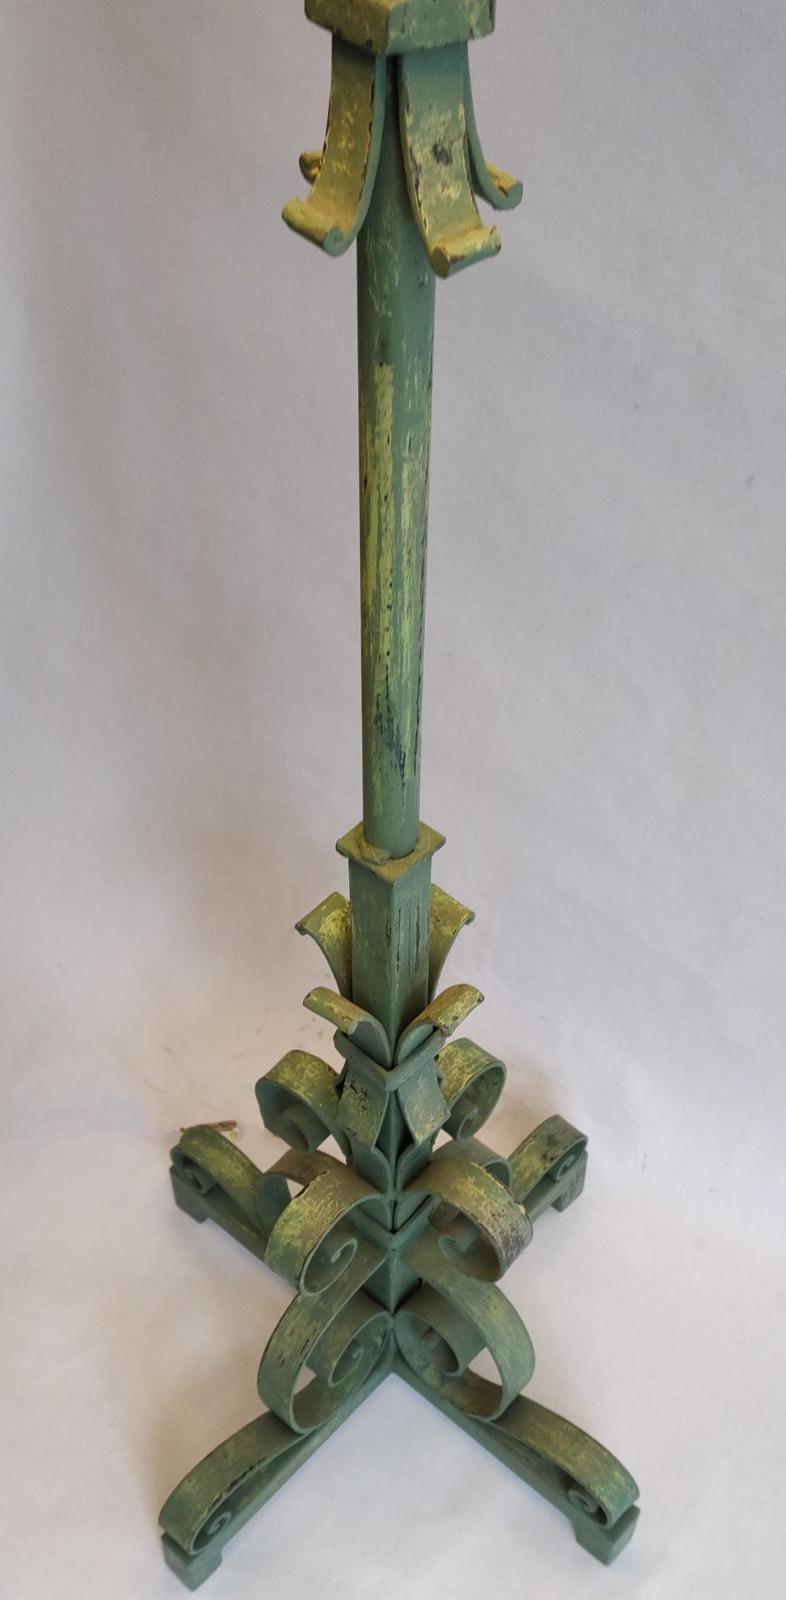 Mexican Original and Elegant Wrought Iron Lamp from the 1950s. in Green, Black and Gold. For Sale